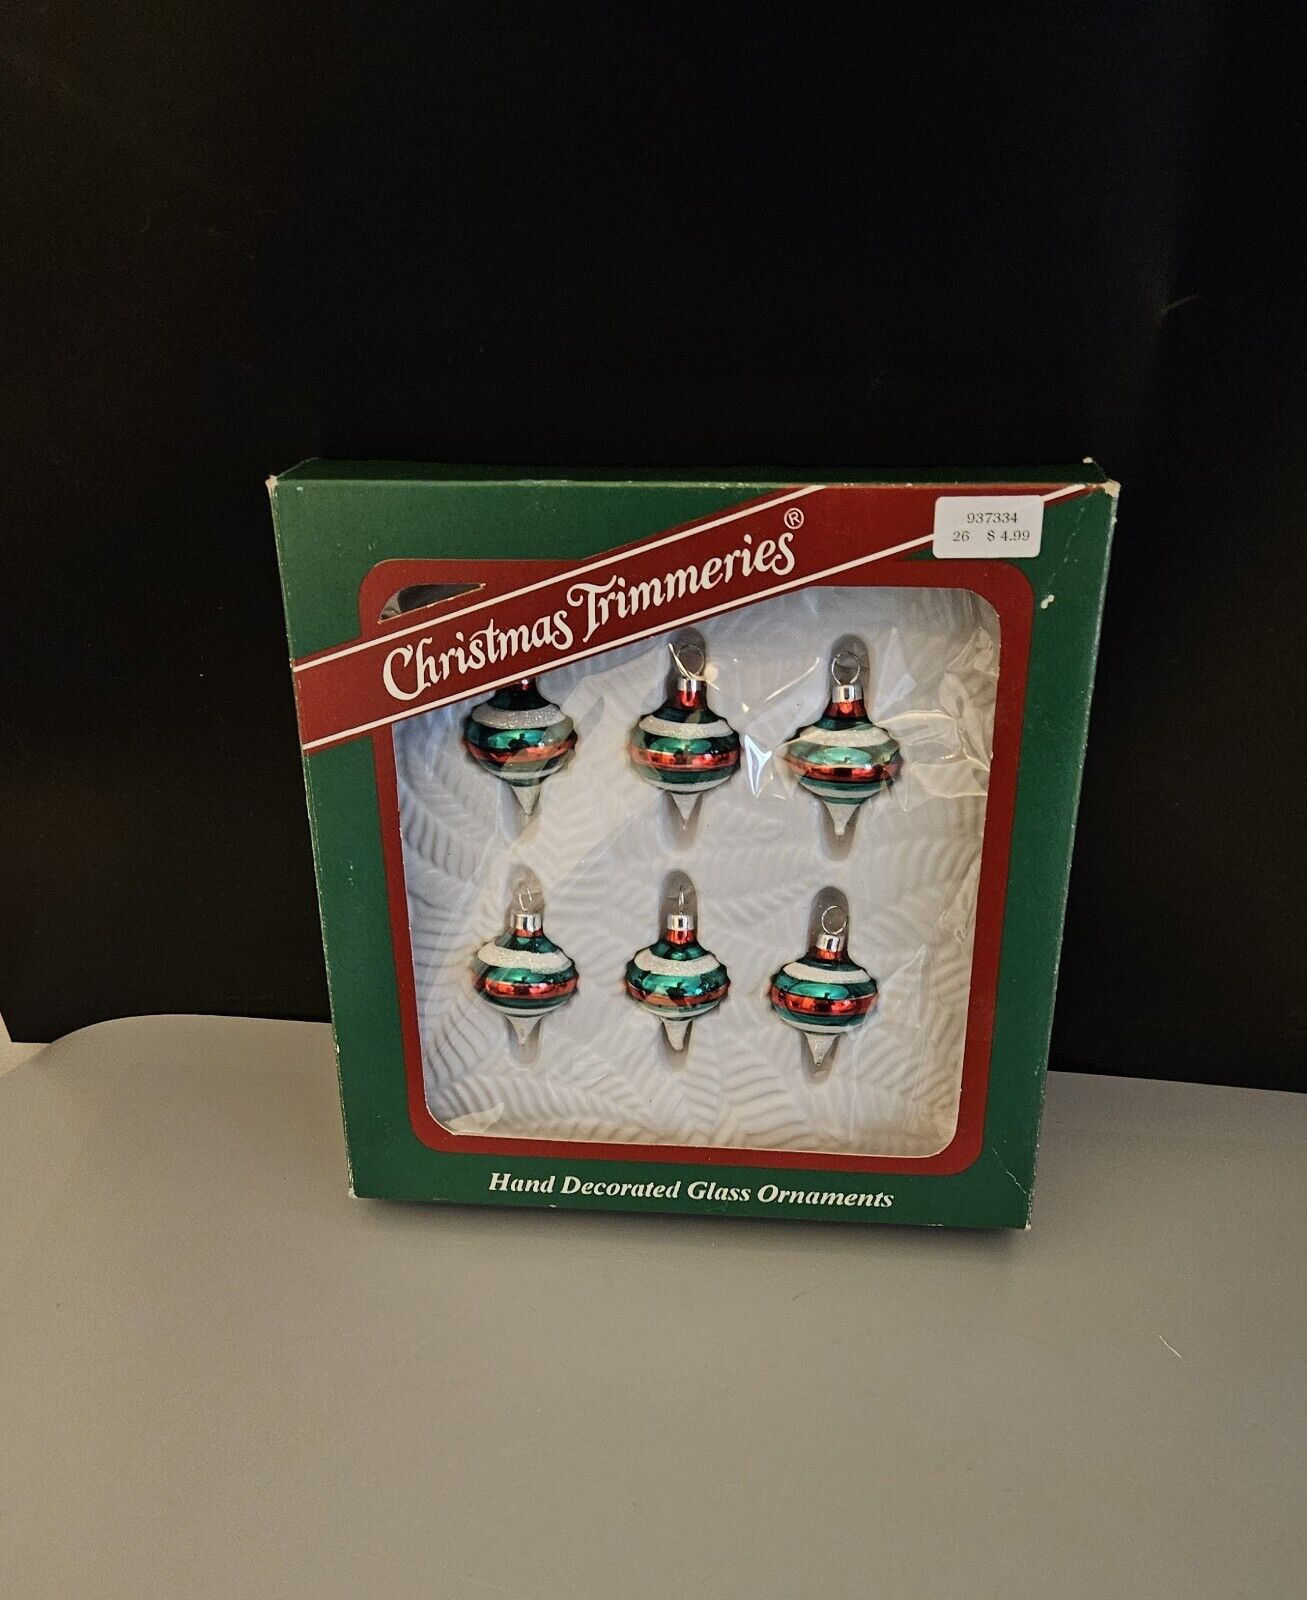 Vintage Christmas Trimmeries Glass Ornaments Box Of 6 By Bradford Hand Decorated